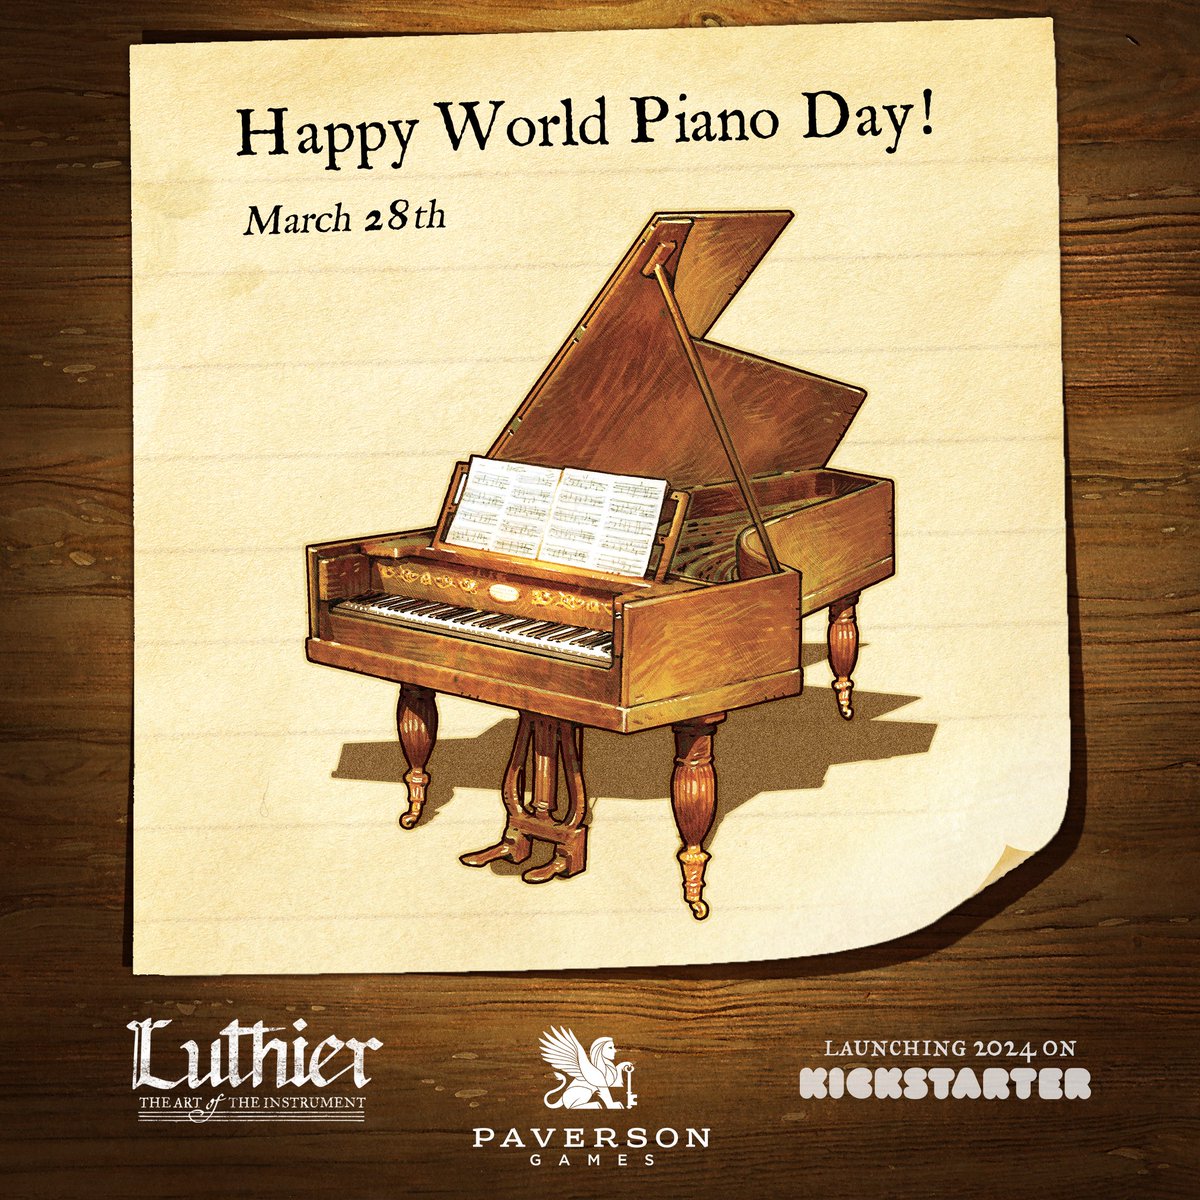 Happy #WorldPianoDay! 🎹 Join us as we celebrate the art of the instrument for our board game, #Luthier, coming to #Kickstarter in 2024! 🥳🎻🎲 #musicalinstrument #luthiergame #paversongames #classicalmusic #music #piano #fortepiano